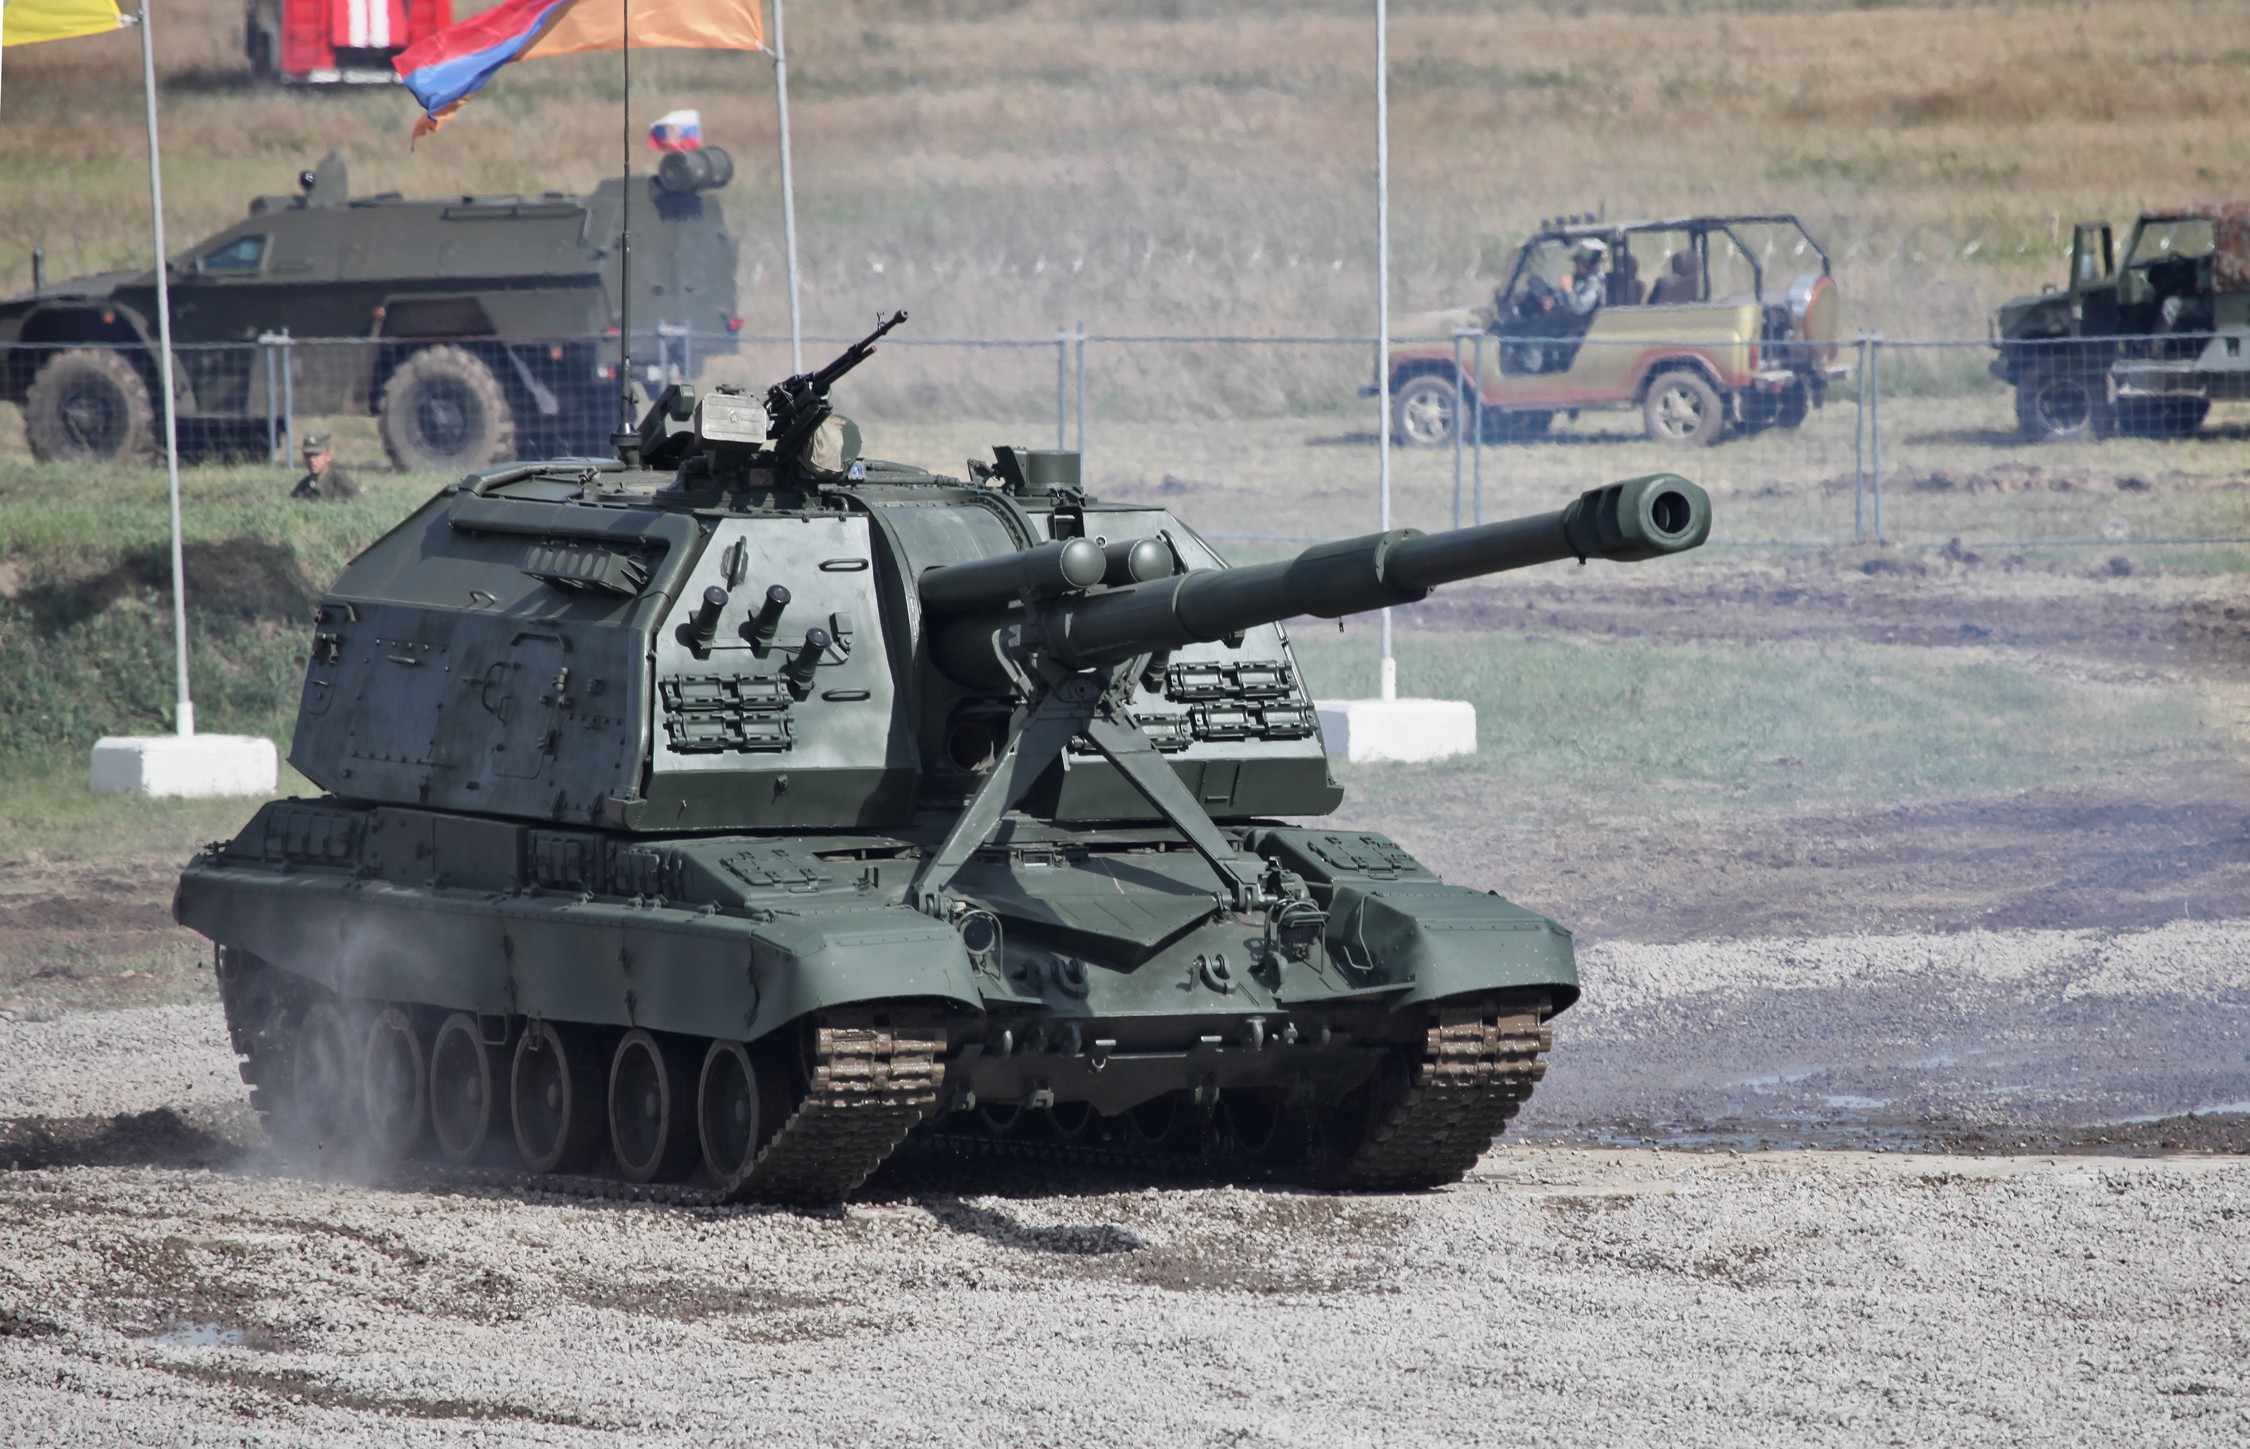 2S19 Msta S, Self Propelled Howitzer, Russian Ground Forces, Vehicle